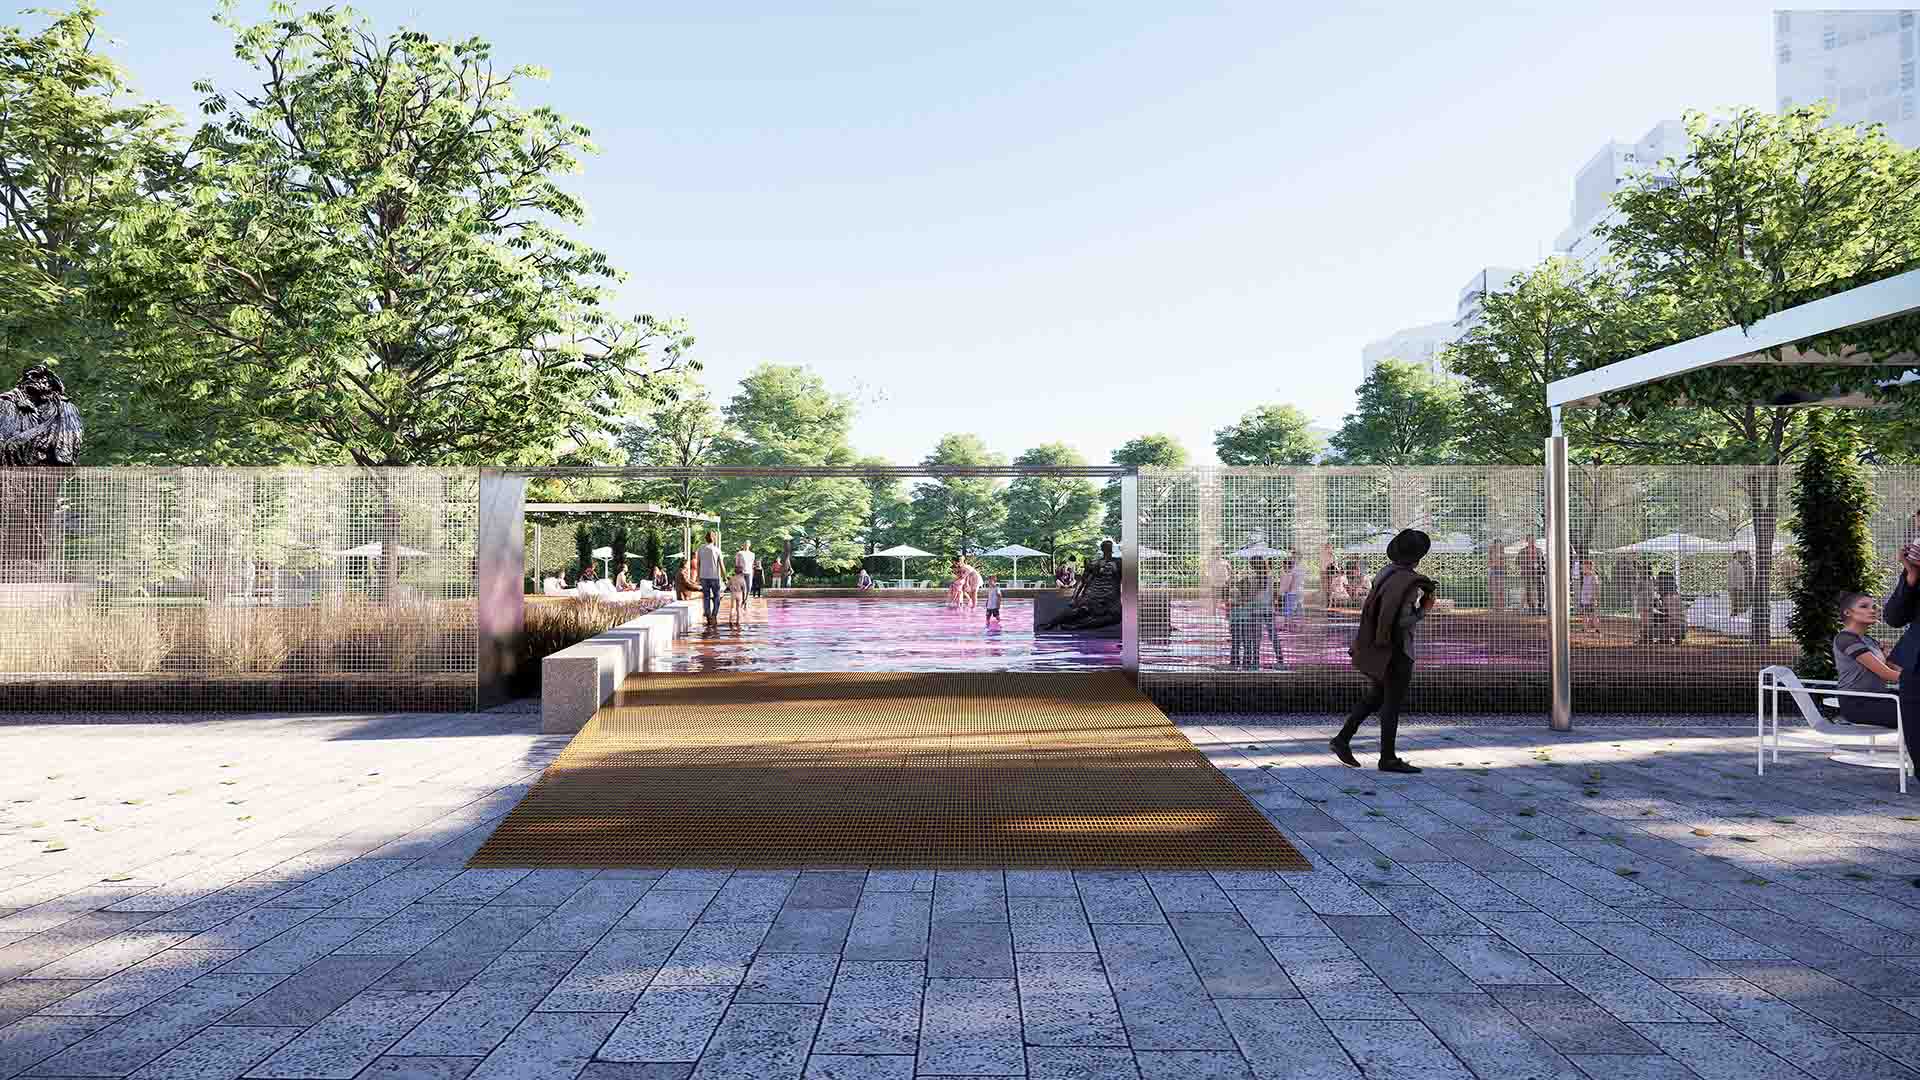 The National Gallery of Victoria's Garden Is Getting a New Pink Pond That You Can Wade Through